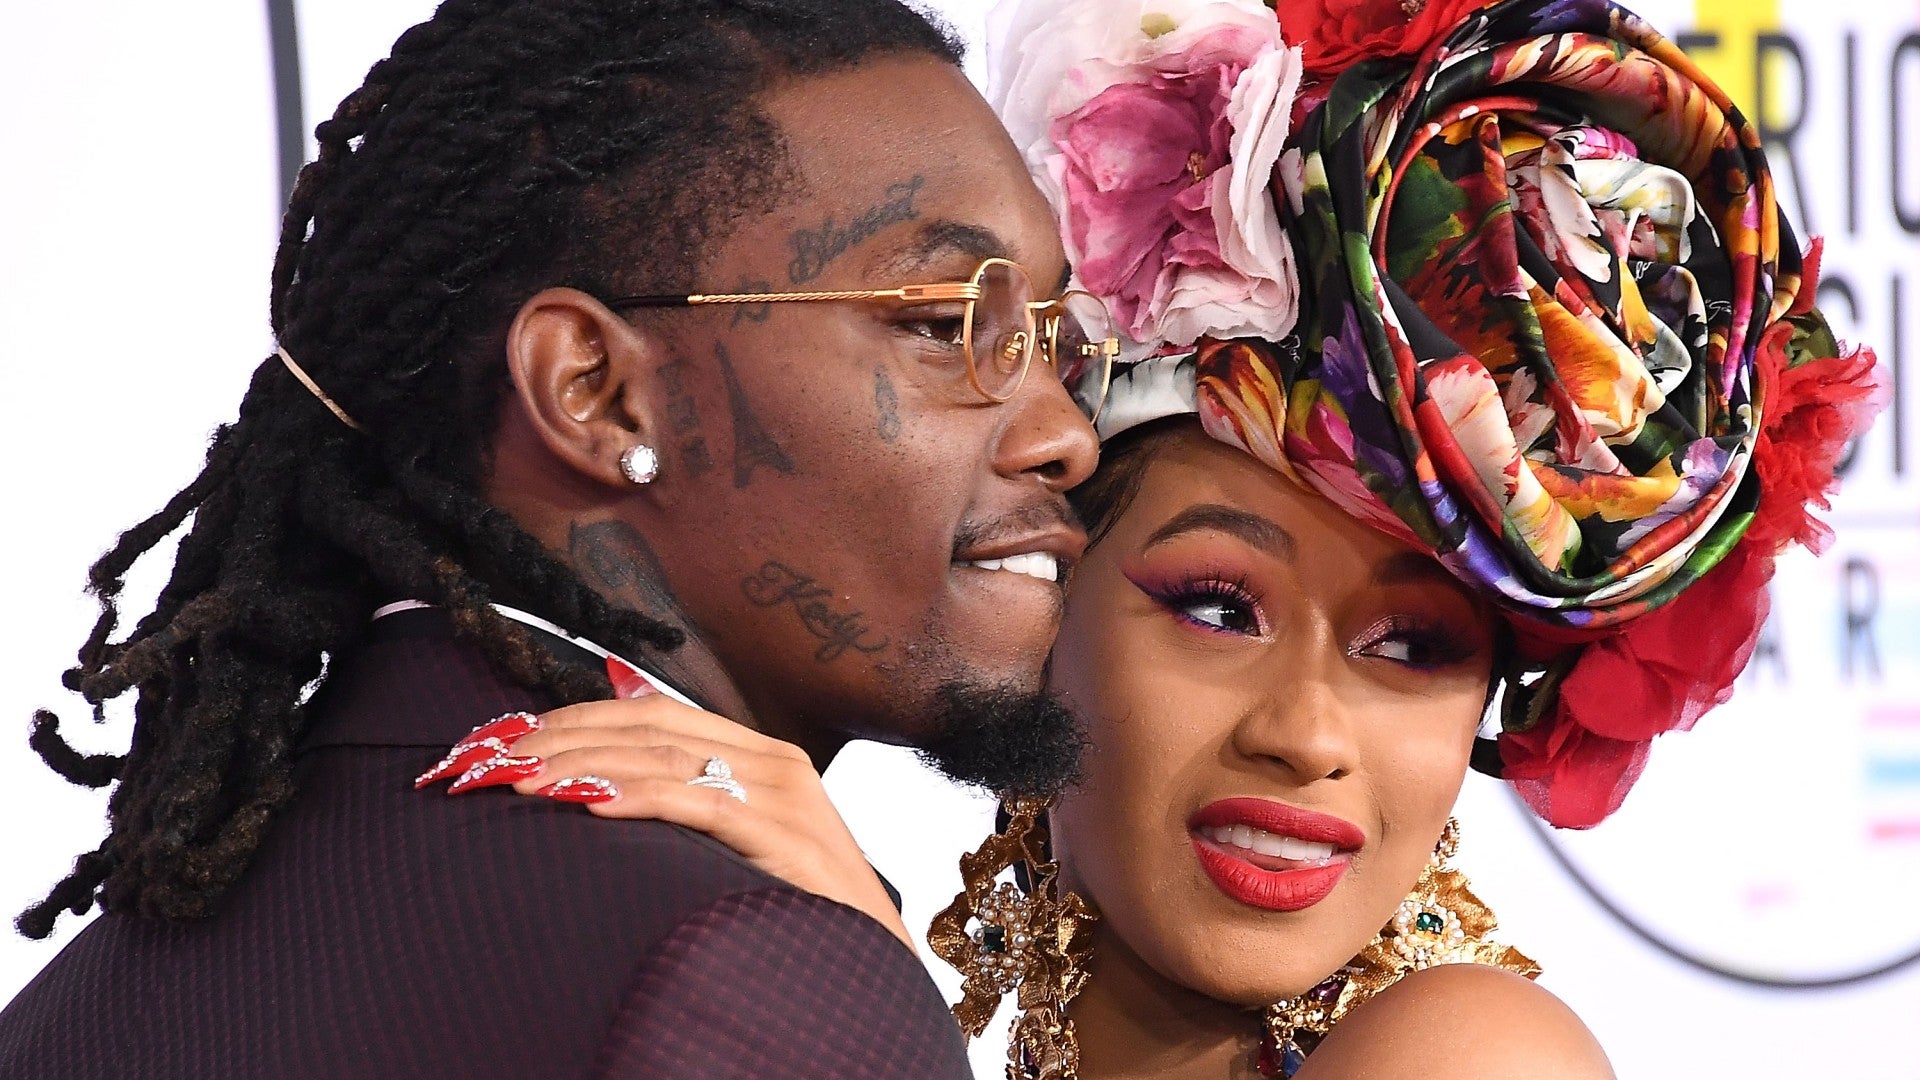 CARDI B AND OFFSET'S DAUGHTER, KULTURE, TURNS FIVE!